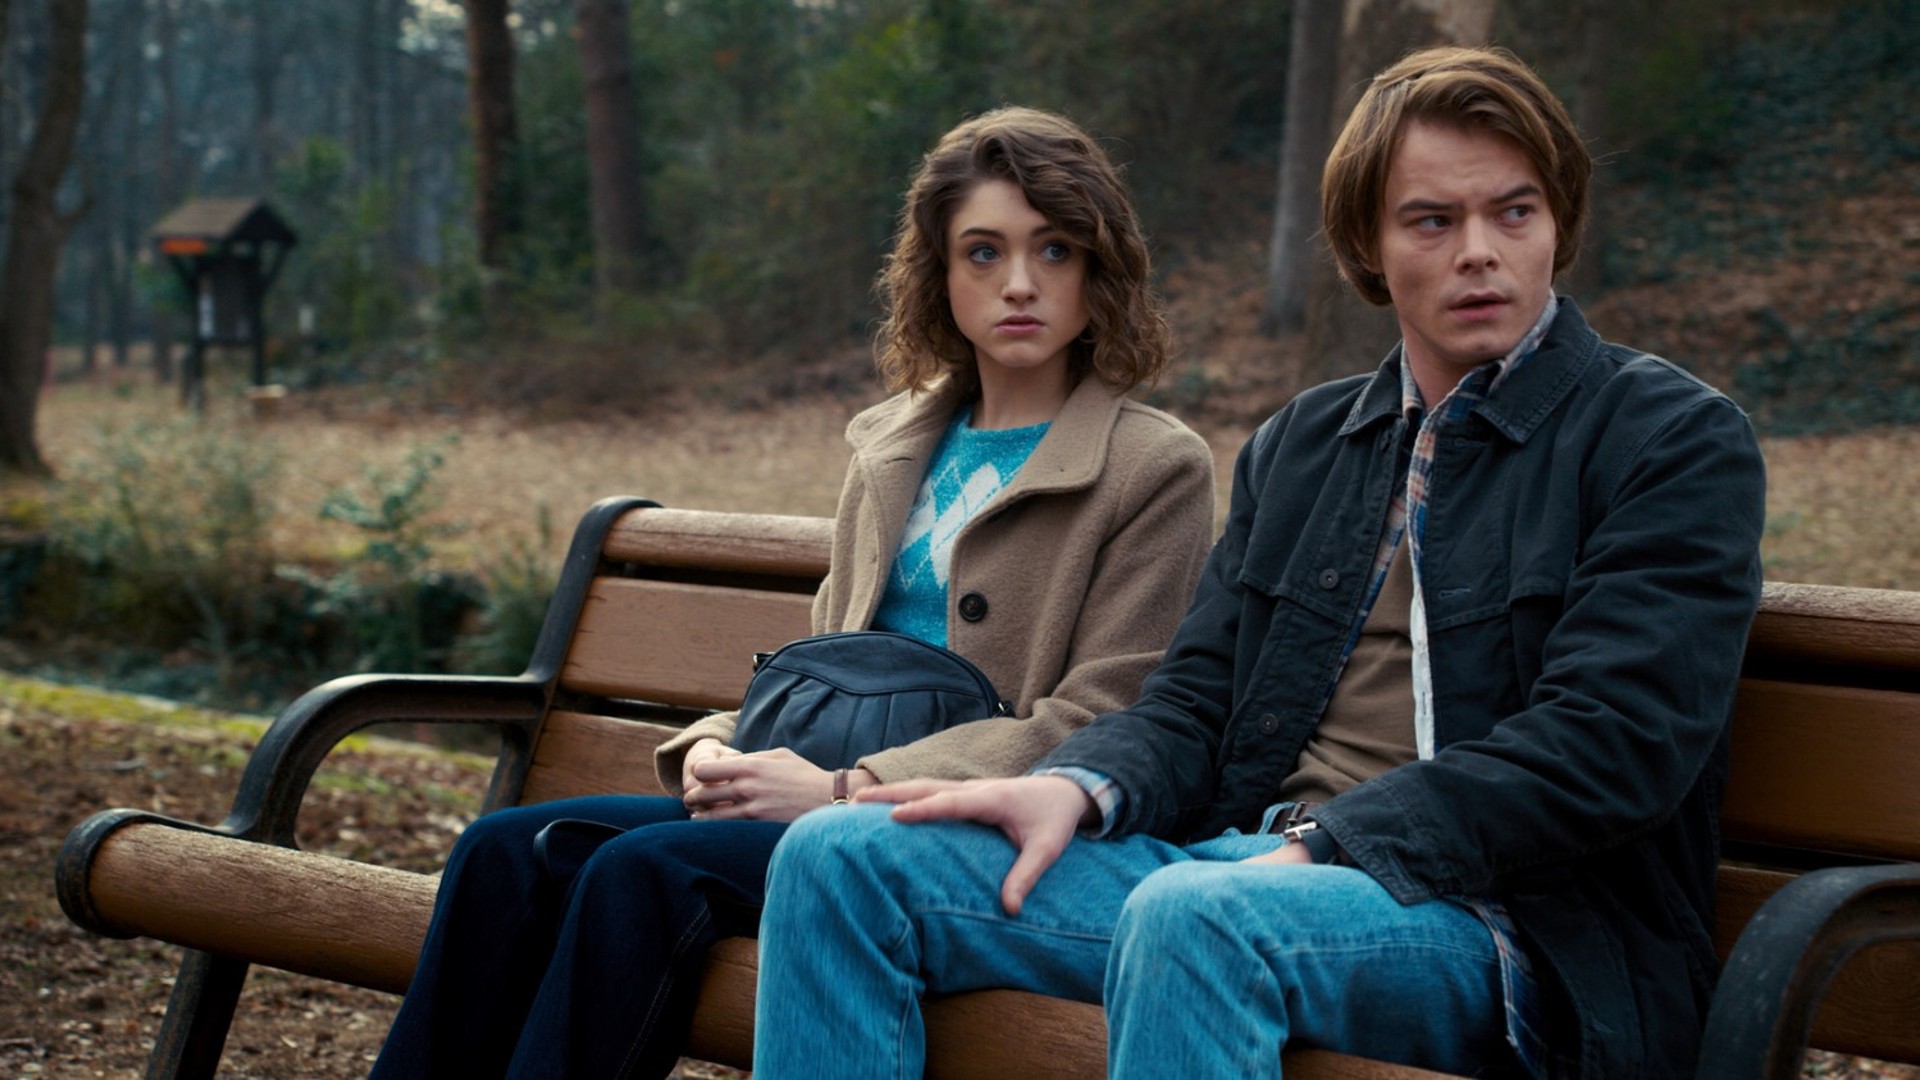 Stranger Things star opens up about Jonathan and Nancy’s relationship struggles in season 4